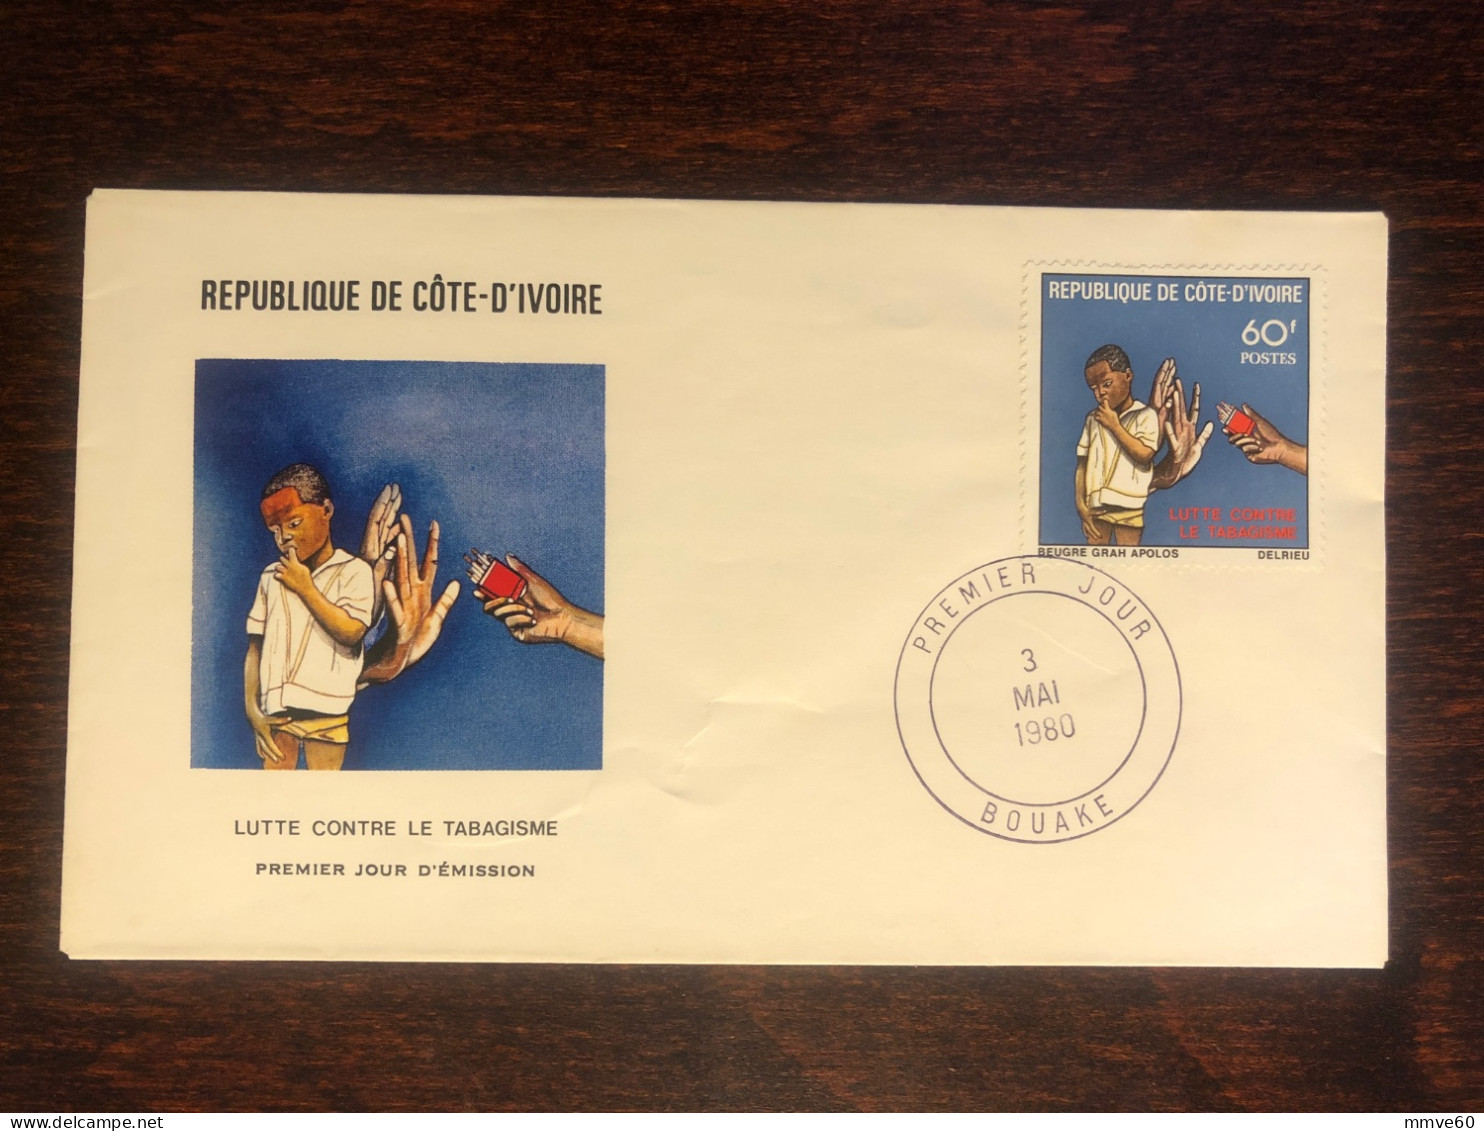 IVORY COAST COTE D’IVOIRE FDC COVER 1980 YEAR  SMOKING HEALTH MEDICINE STAMPS - Costa De Marfil (1960-...)